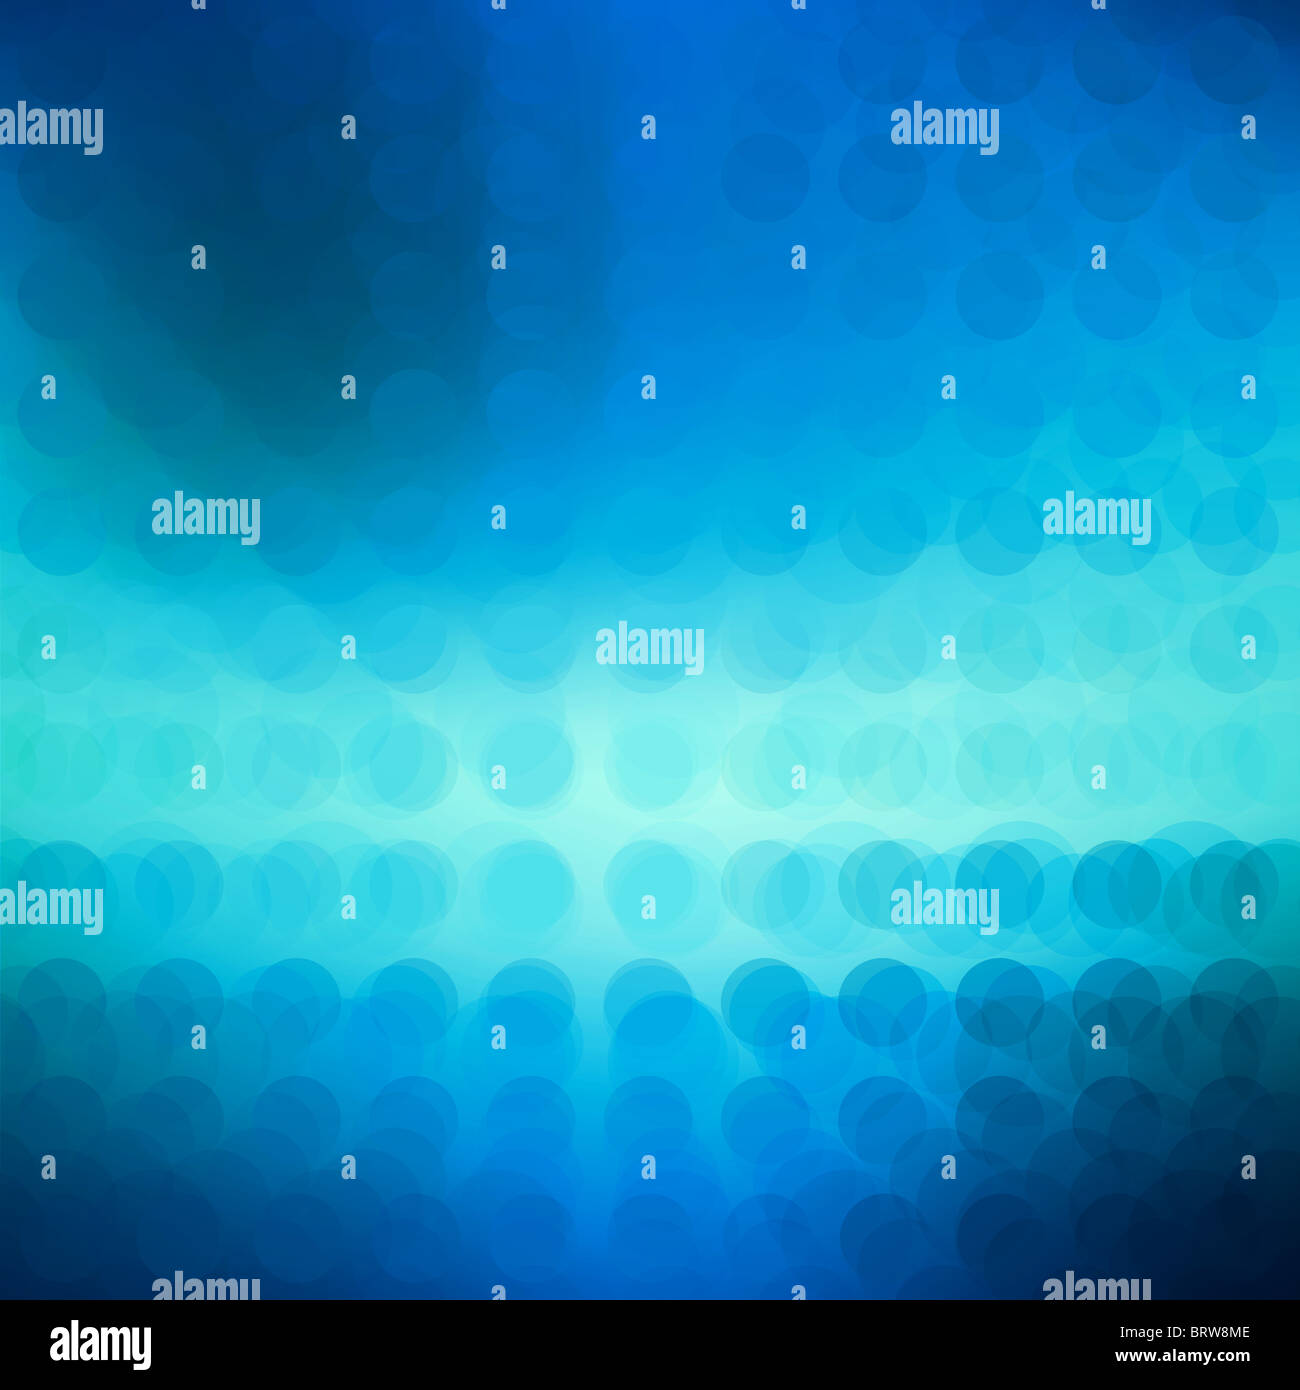 Abstract background of a blue circles pattern Stock Photo